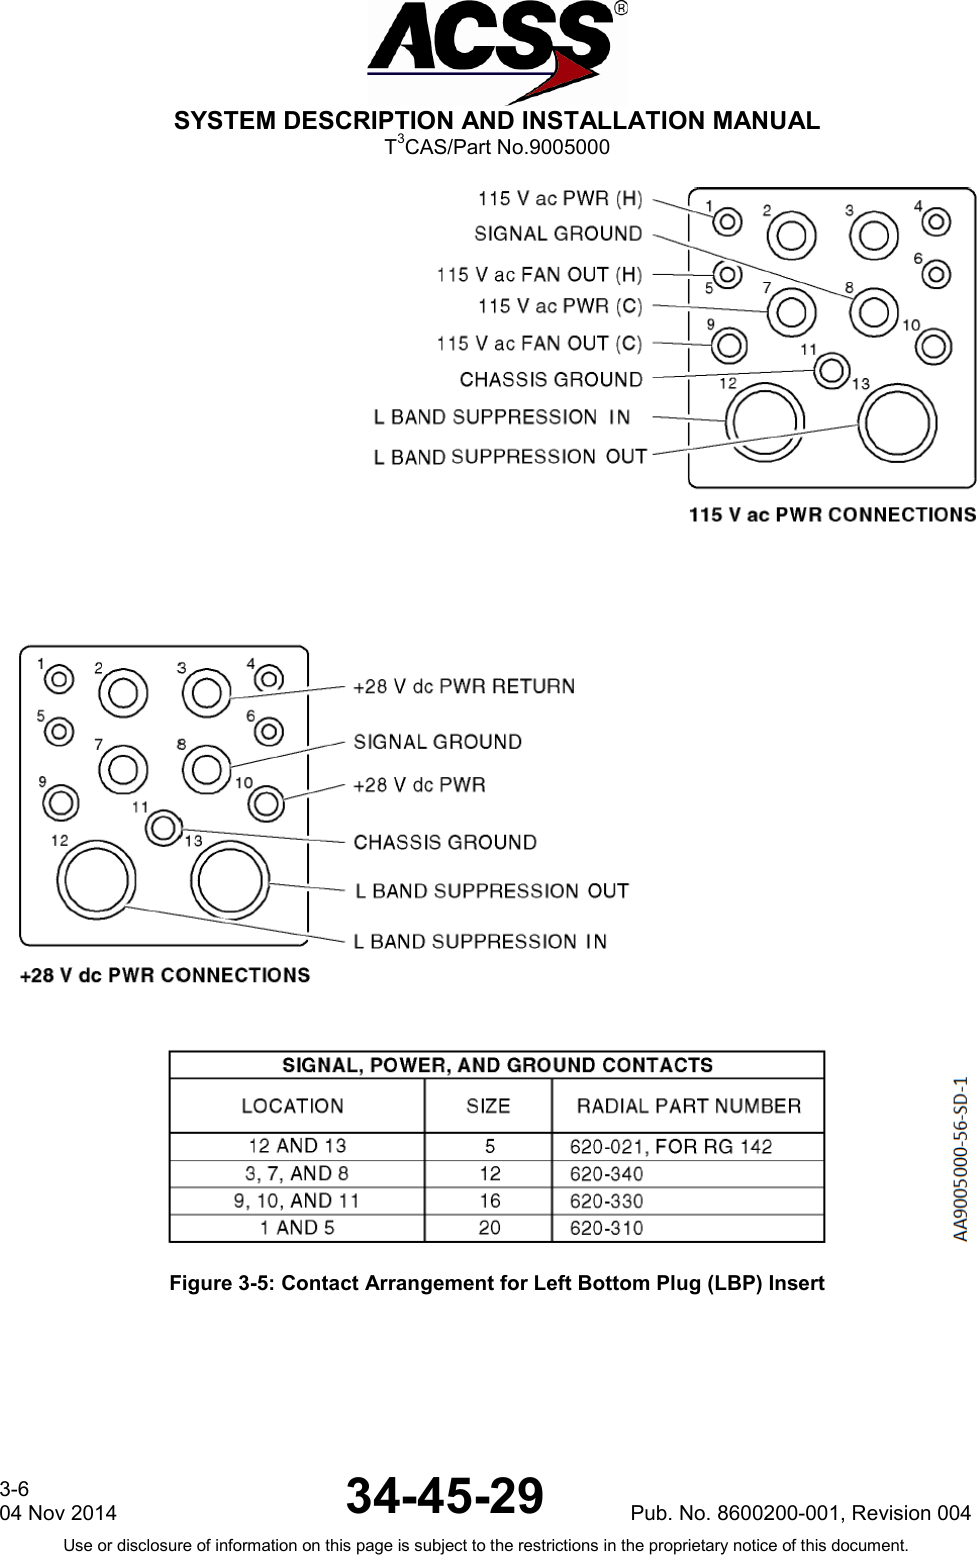  SYSTEM DESCRIPTION AND INSTALLATION MANUAL T3CAS/Part No.9005000  Figure 3-5: Contact Arrangement for Left Bottom Plug (LBP) Insert 3-6 04 Nov 2014 34-45-29 Pub. No. 8600200-001, Revision 004 Use or disclosure of information on this page is subject to the restrictions in the proprietary notice of this document.    